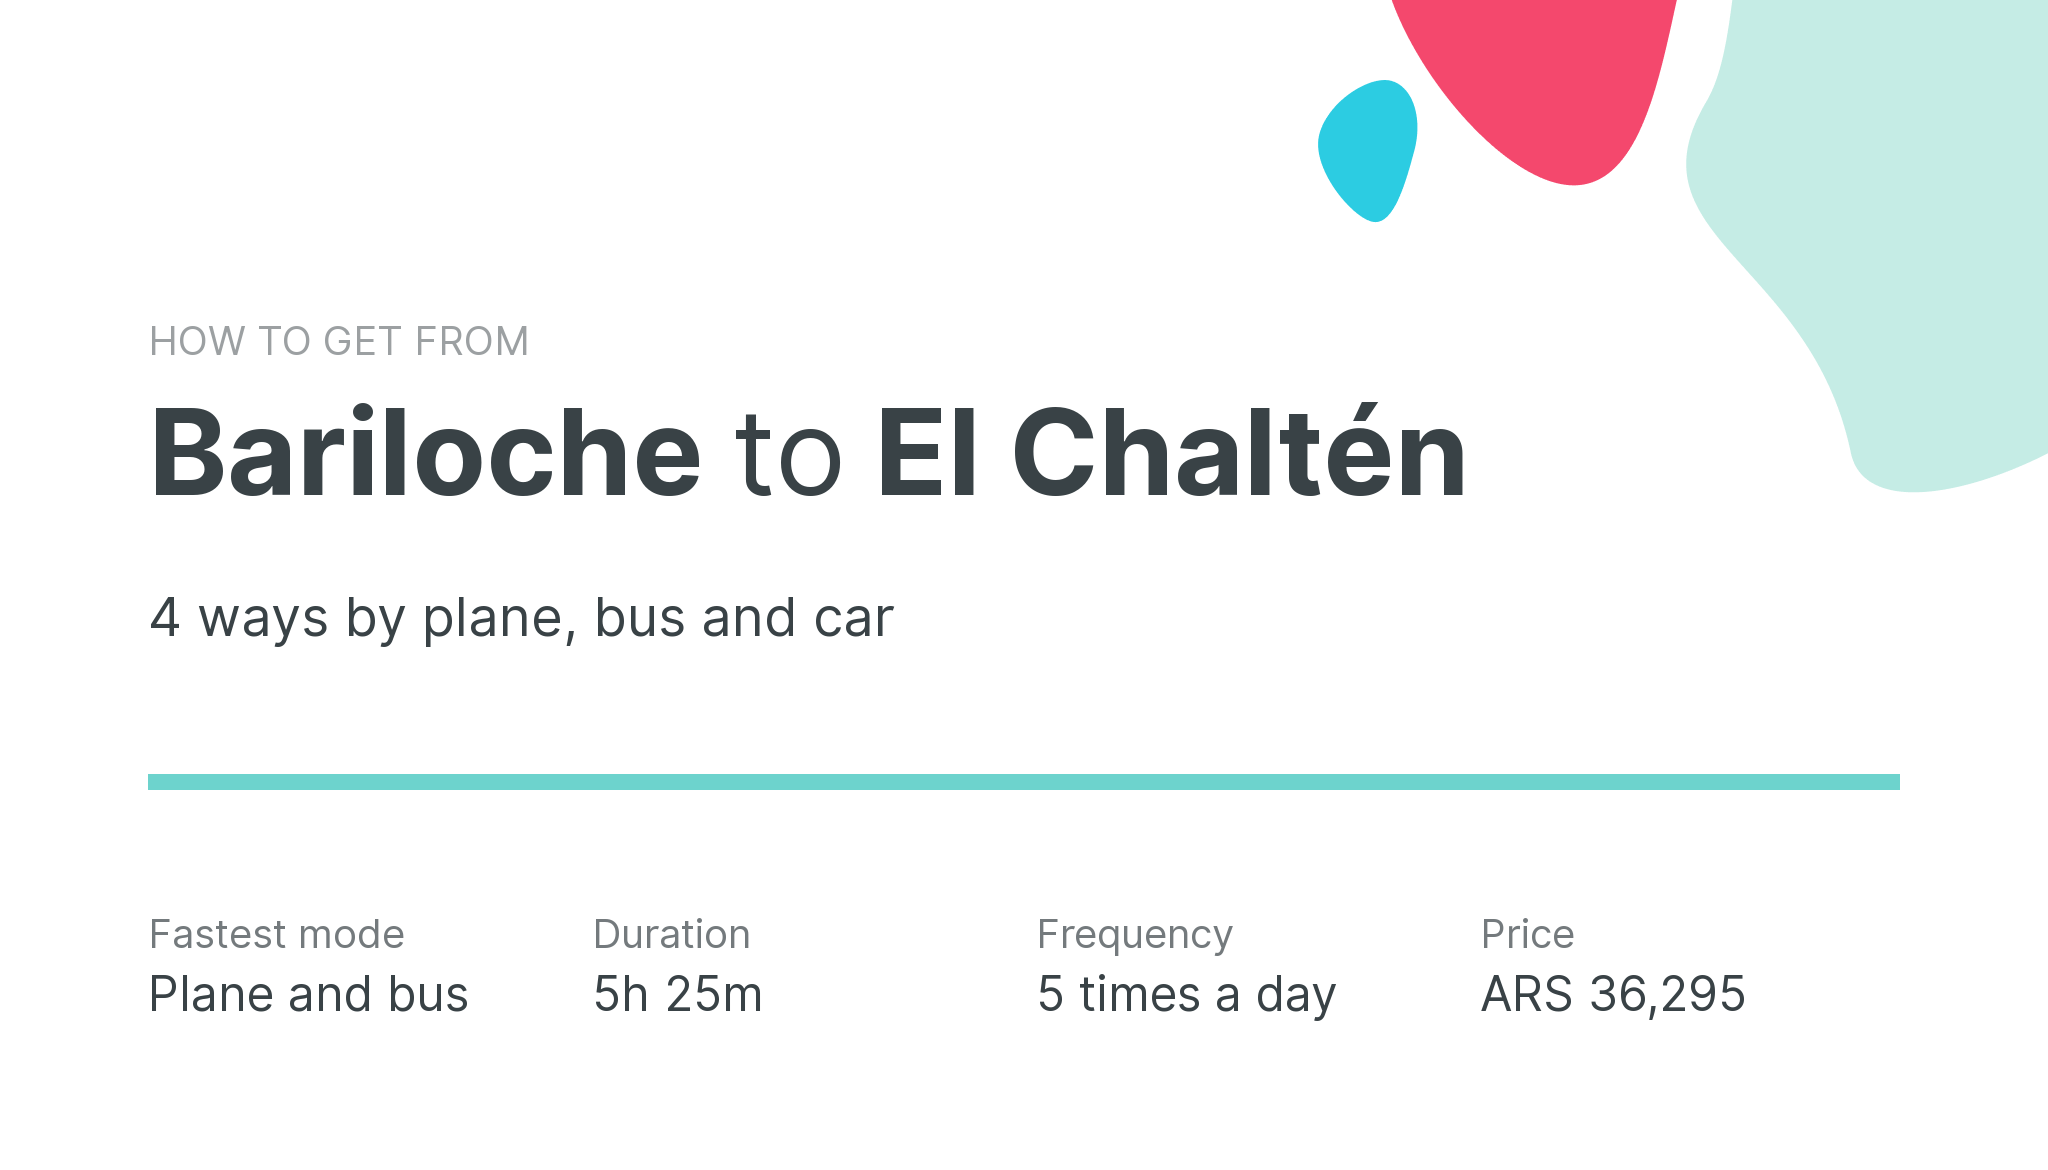 How do I get from Bariloche to El Chaltén